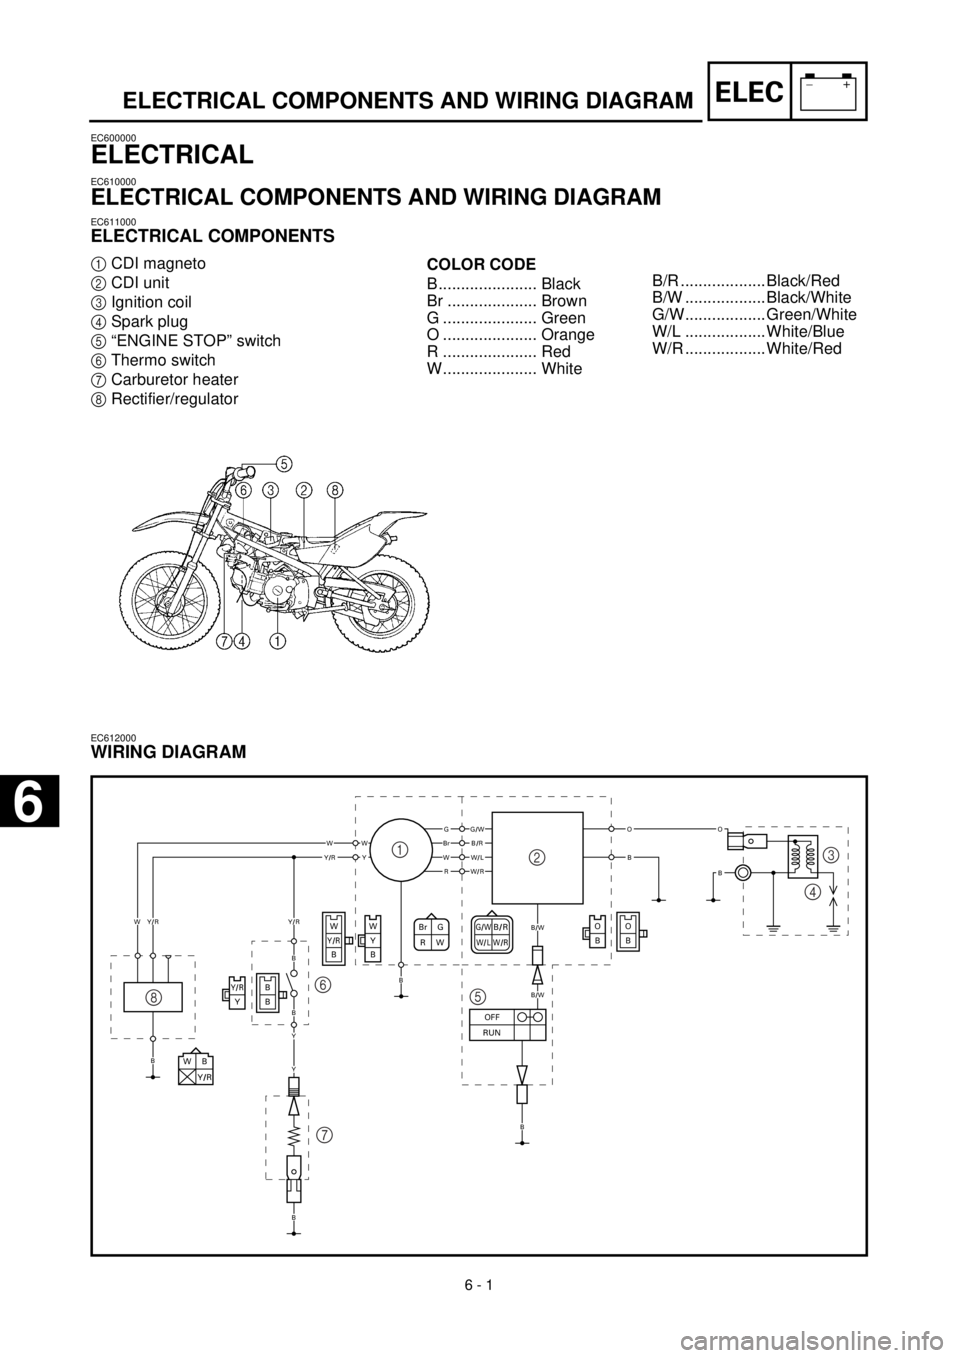 YAMAHA TTR90 2000  Owners Manual  
6 - 1
–+ELEC
 
ELECTRICAL COMPONENTS AND WIRING DIAGRAM 
EC600000 
ELECTRICAL 
EC610000 
ELECTRICAL COMPONENTS AND WIRING DIAGRAM 
EC611000 
ELECTRICAL COMPONENTS 
1  
CDI magneto  
2  
CDI unit  